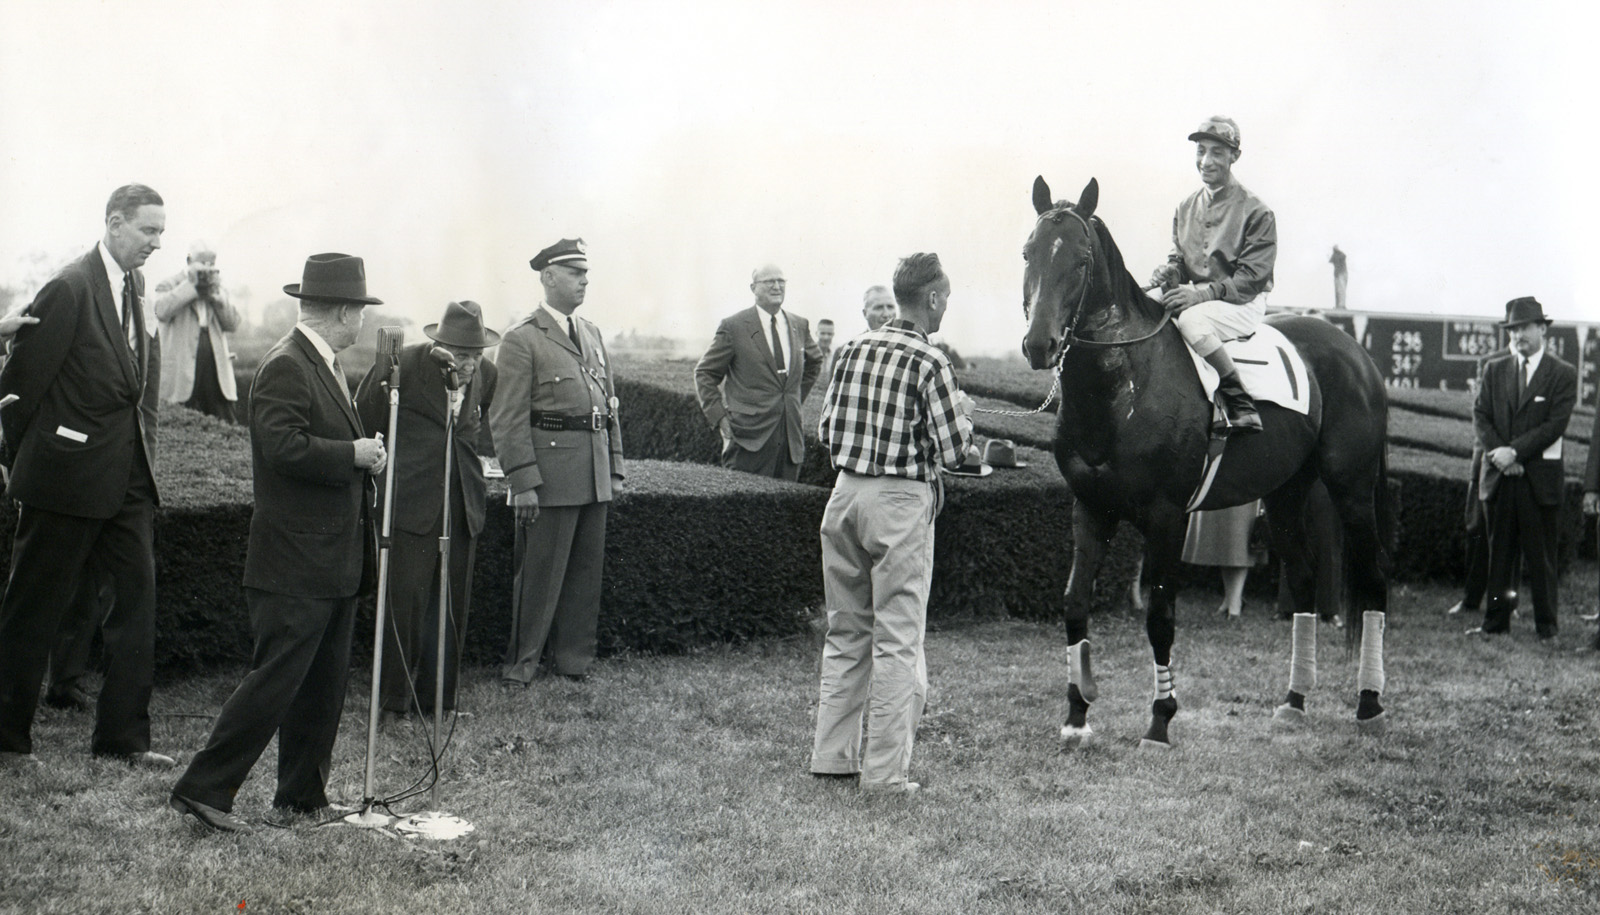 Nashua's farewell appearance at Keeneland with Eddie Arcaro up and trainer "Sunny Jim" Fitzsimmons in attendance, October 1956 (Museum Collection)